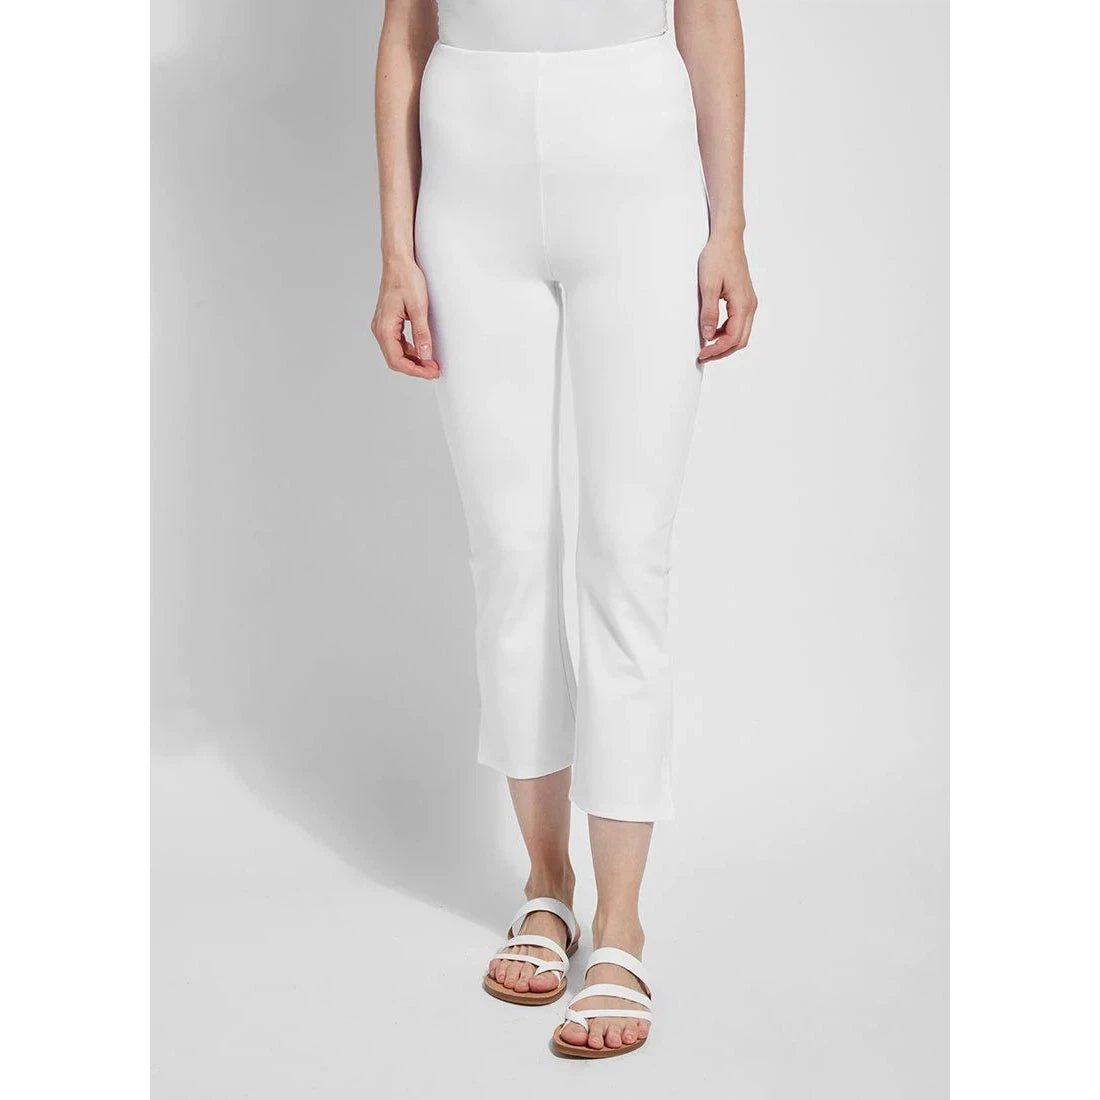 Lysee' Cropped Kick Flare White